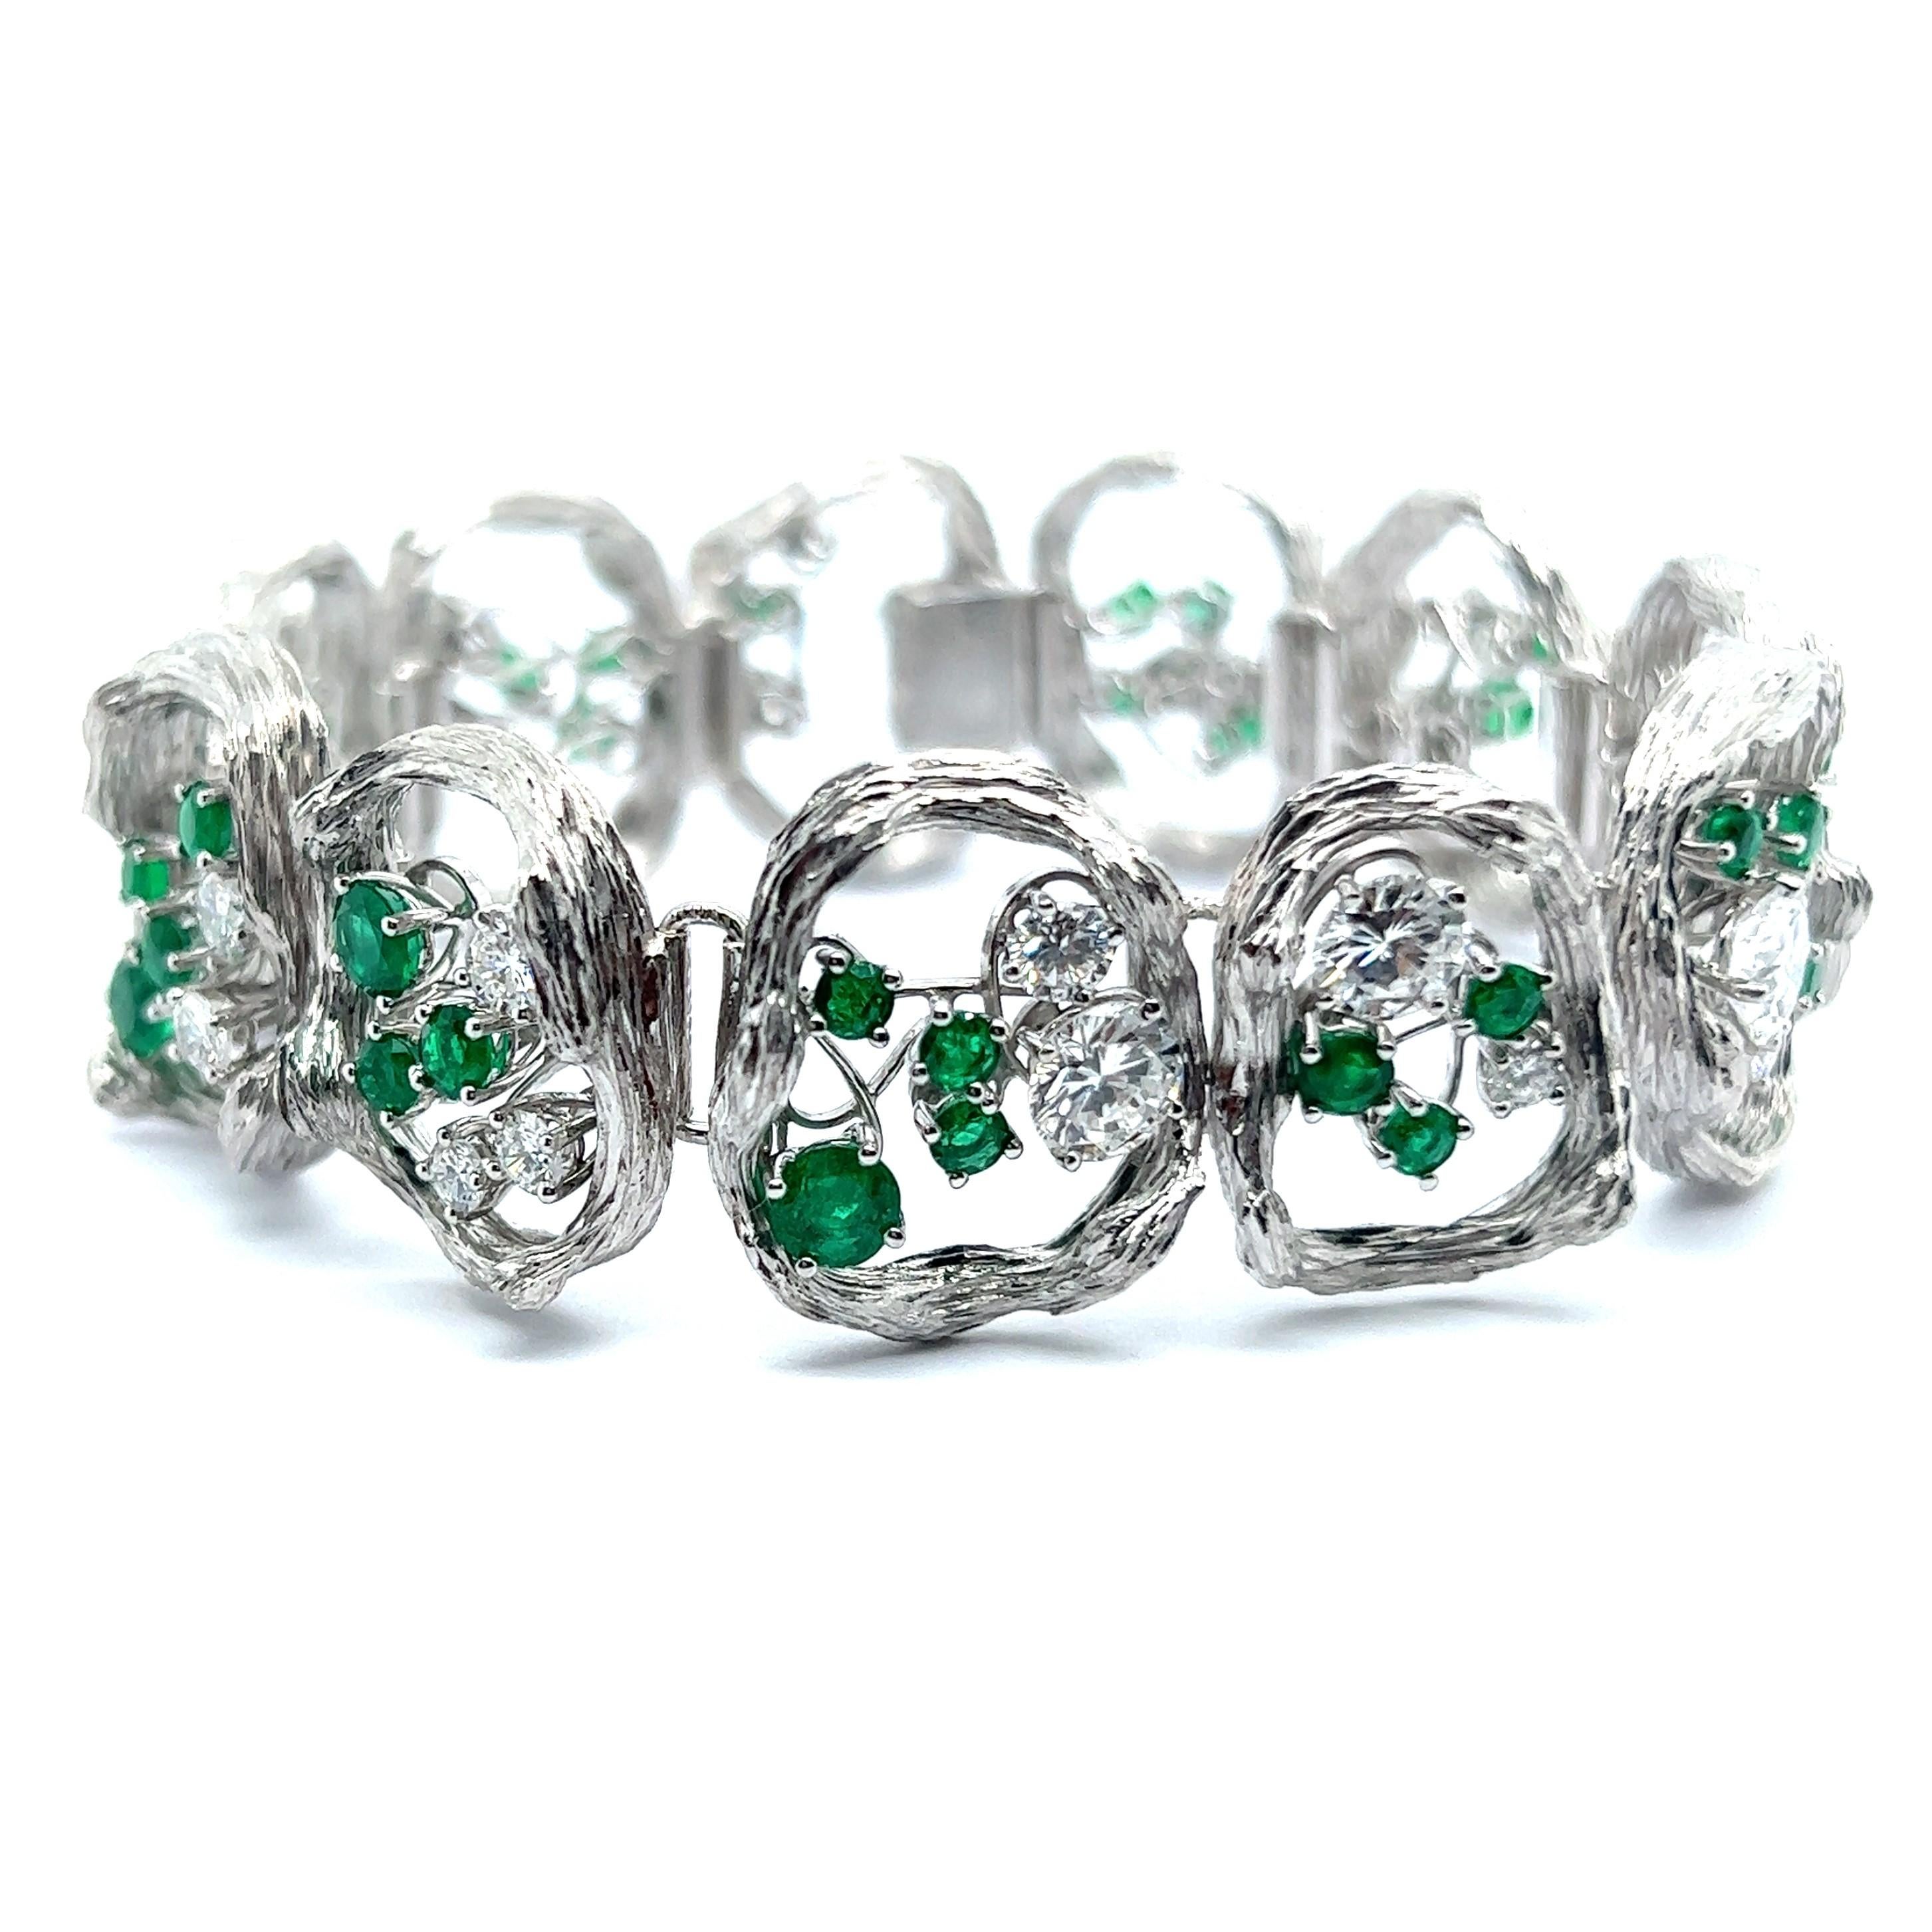 Brilliant Cut Emerald and Diamond Bracelet in 18 Karat White Gold by Paul Binder  For Sale